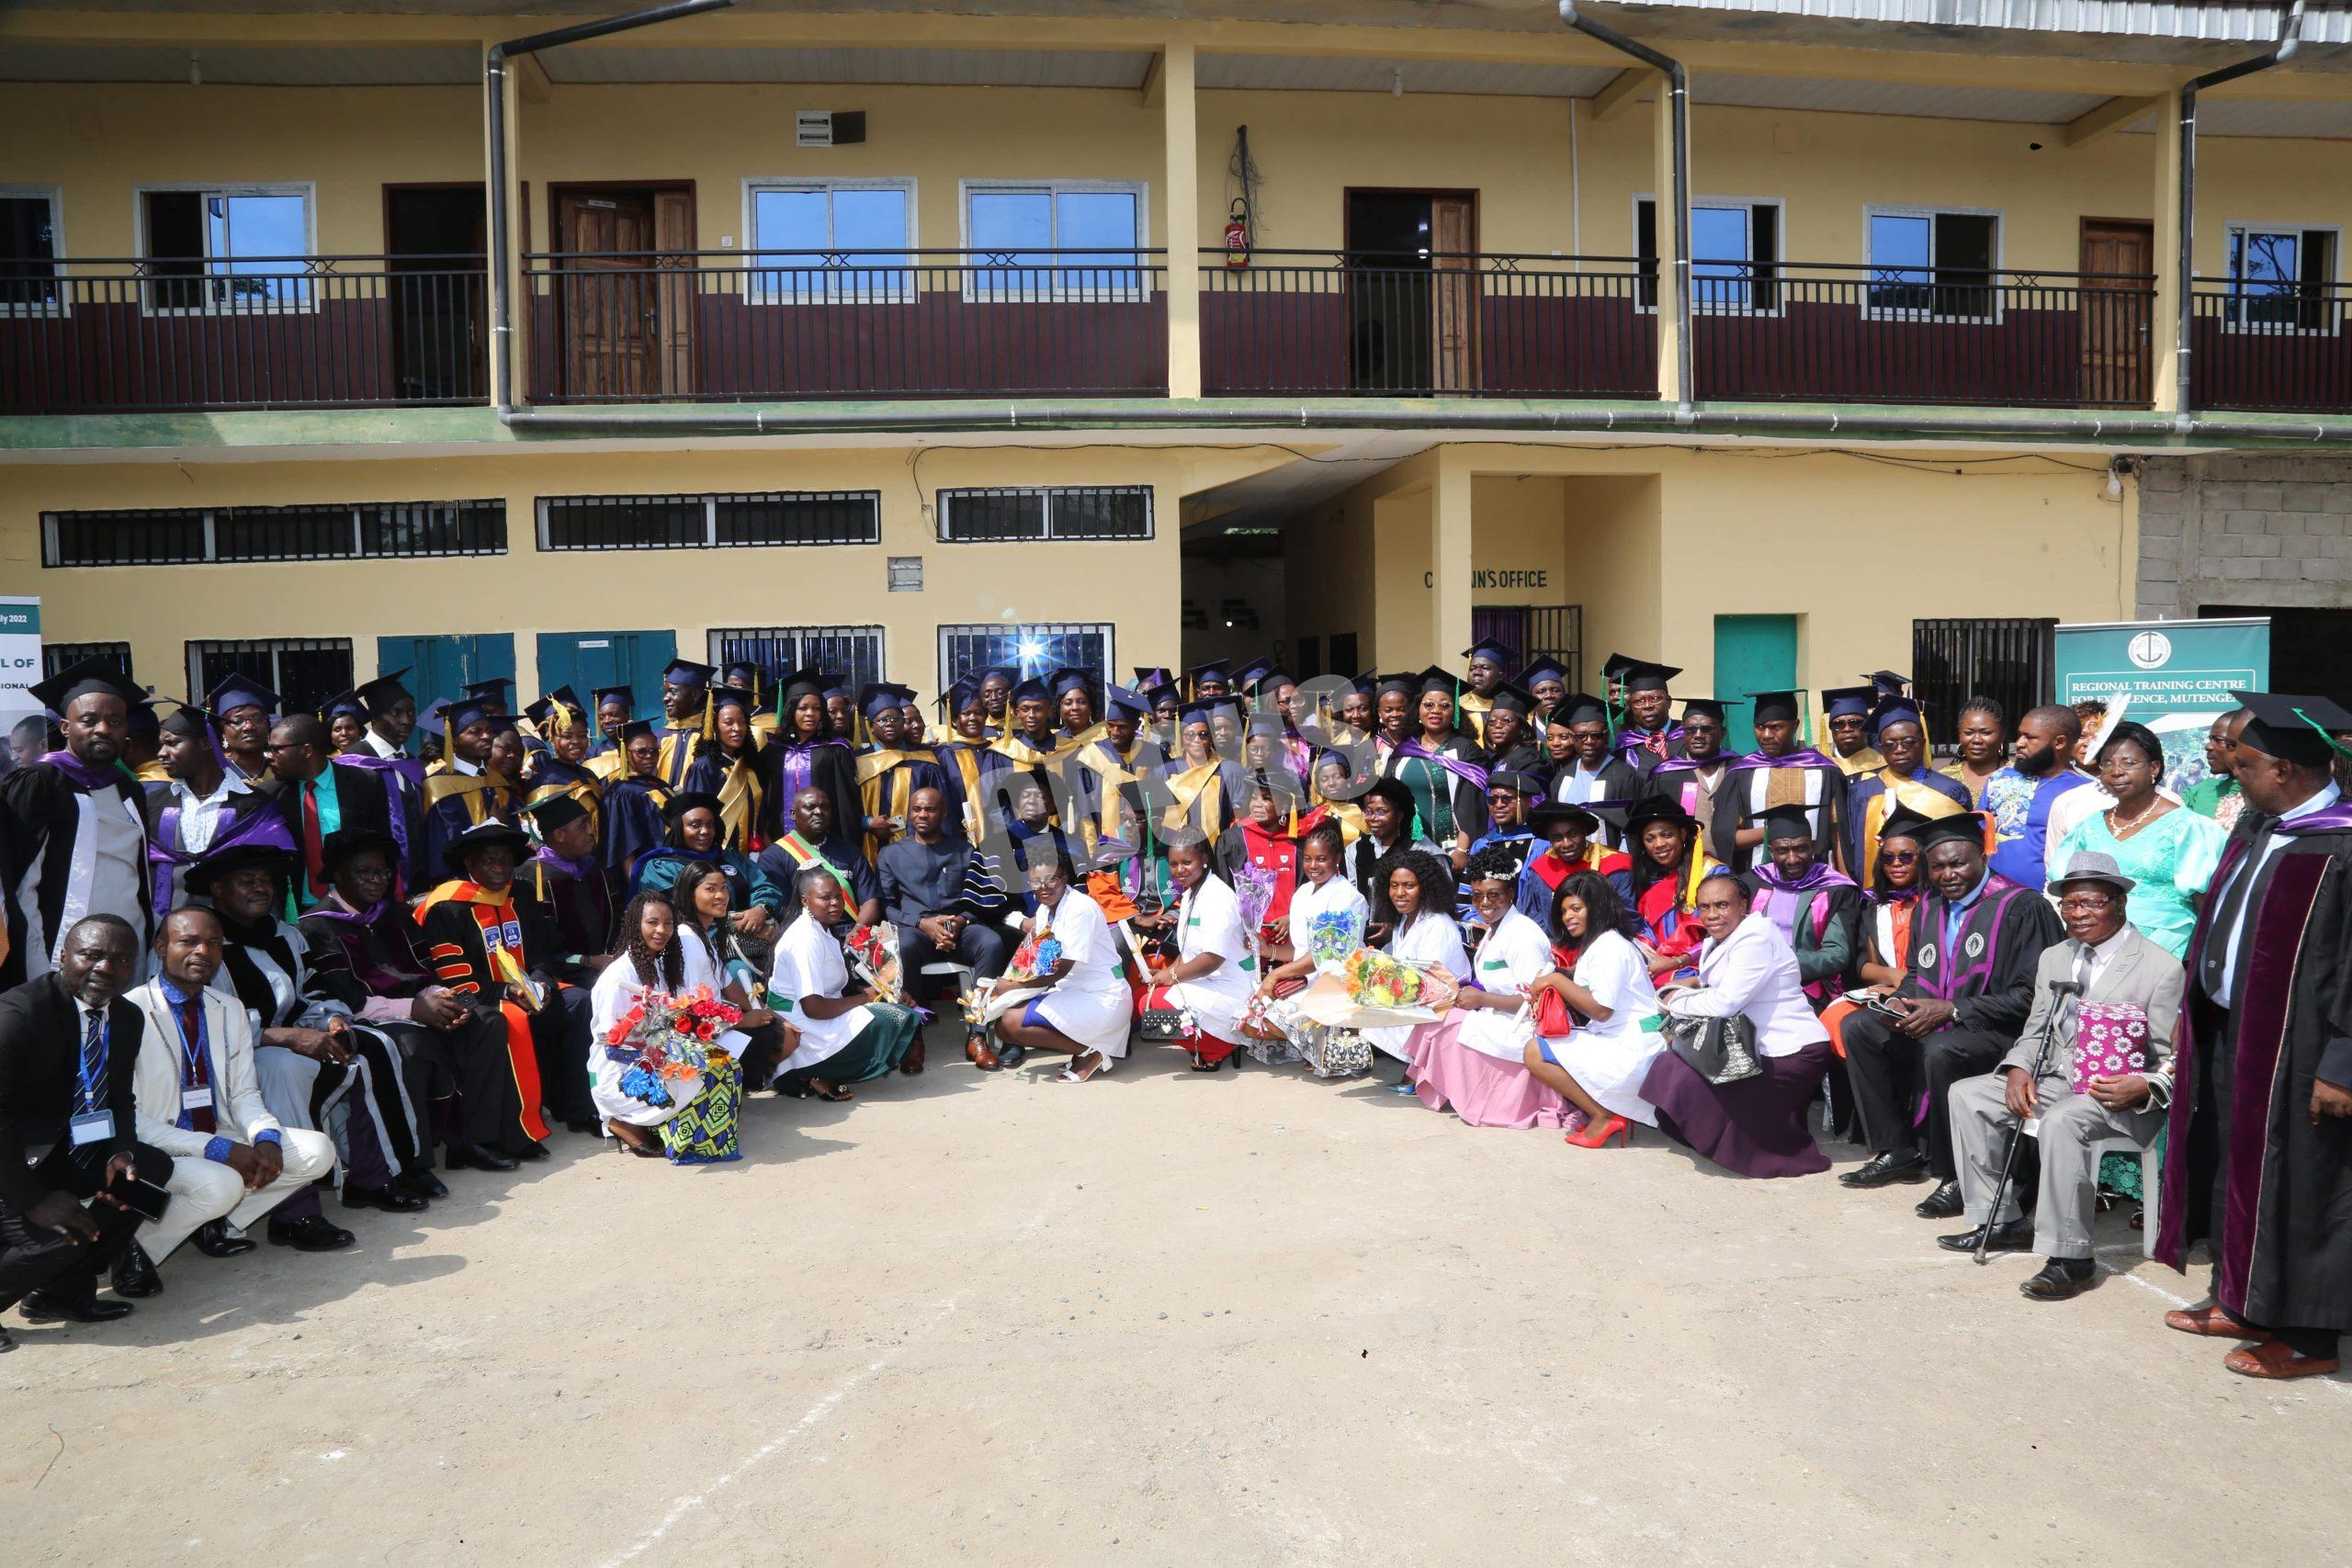 Family photo of Graduating Students With Guests of Honour